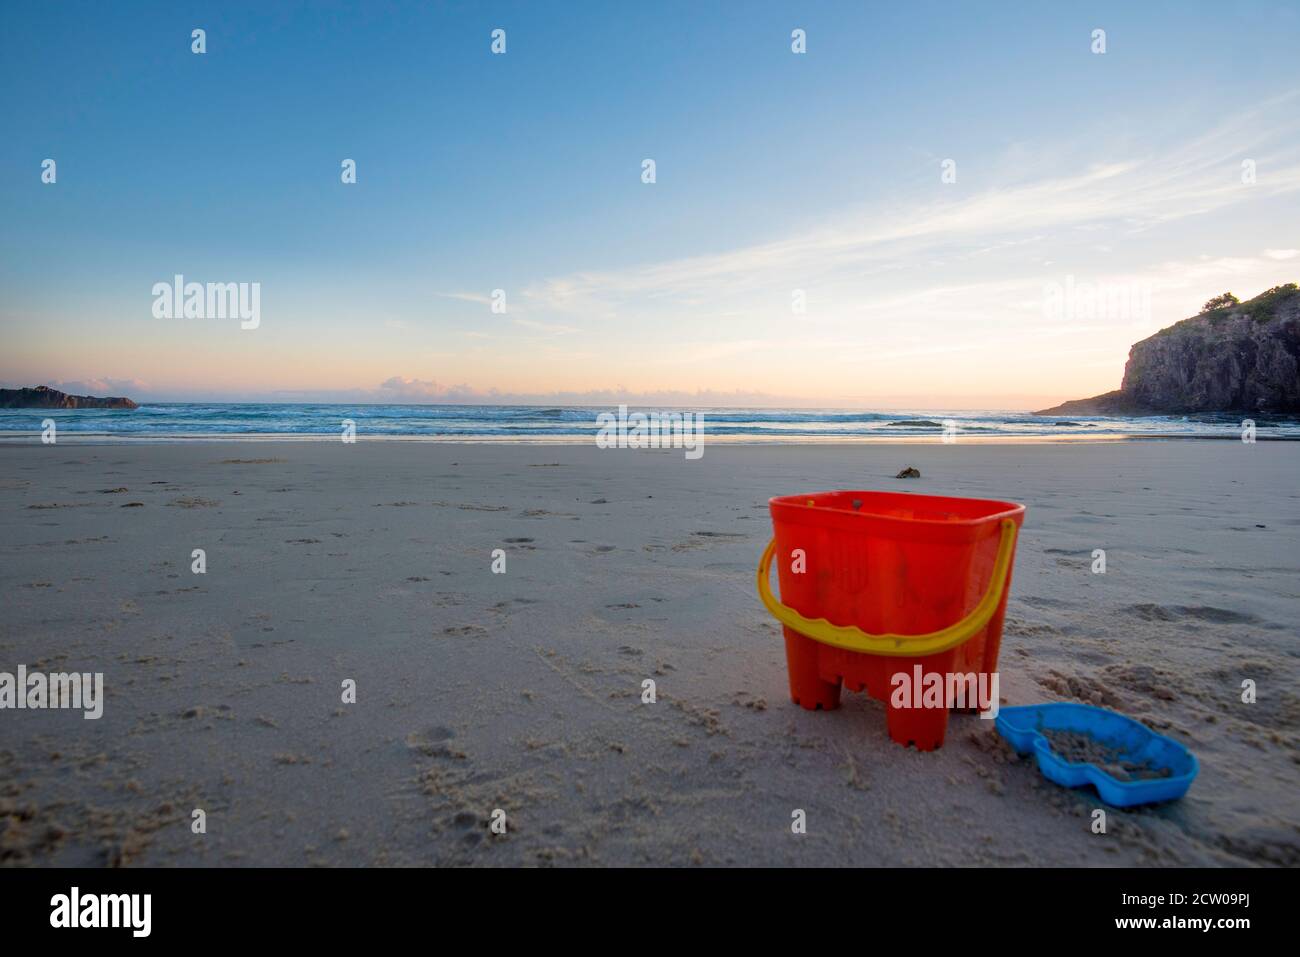 Abandoned beach toys left on an empty beach greet the sunrise early on a summers morning at Little Beach, Scotts Head, New South Wales, Australia Stock Photo